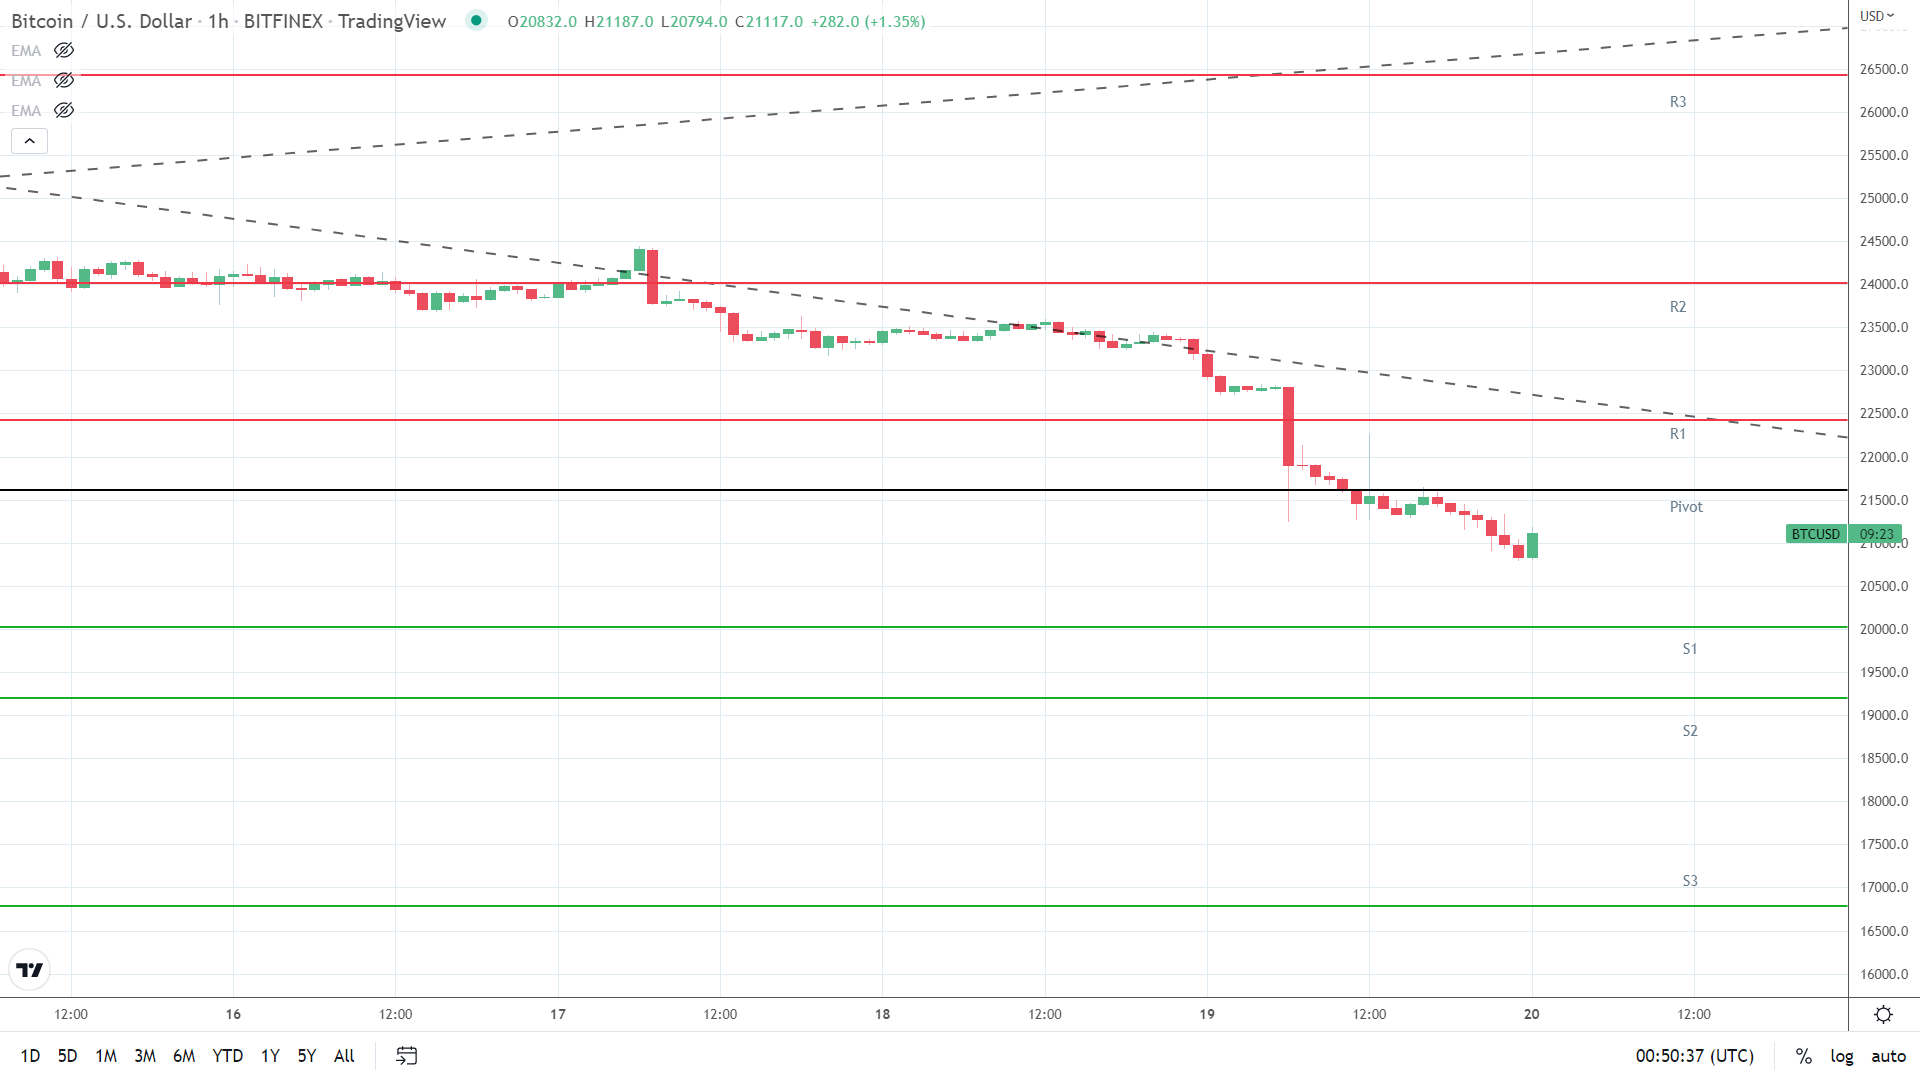 BTC support levels in play.